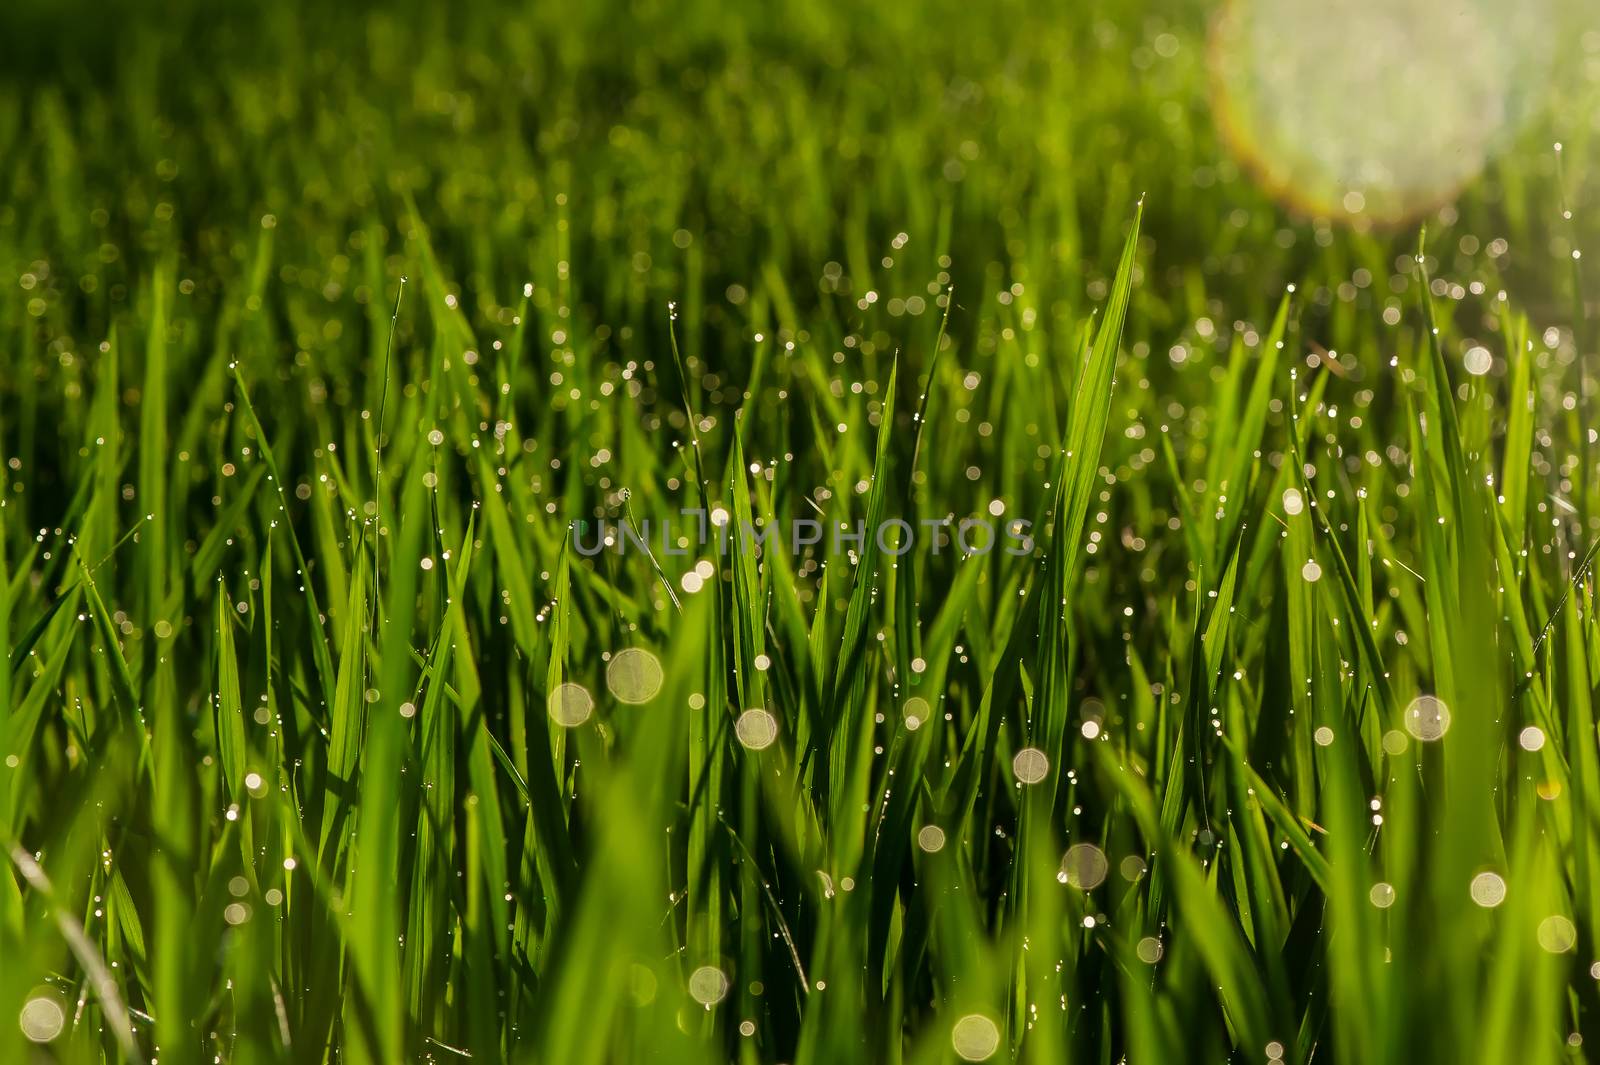 Rice paddy at the morning time, covered with crystal clean dew drops. The focus is blurred. The object is extra sharp. Close-up of the grass.